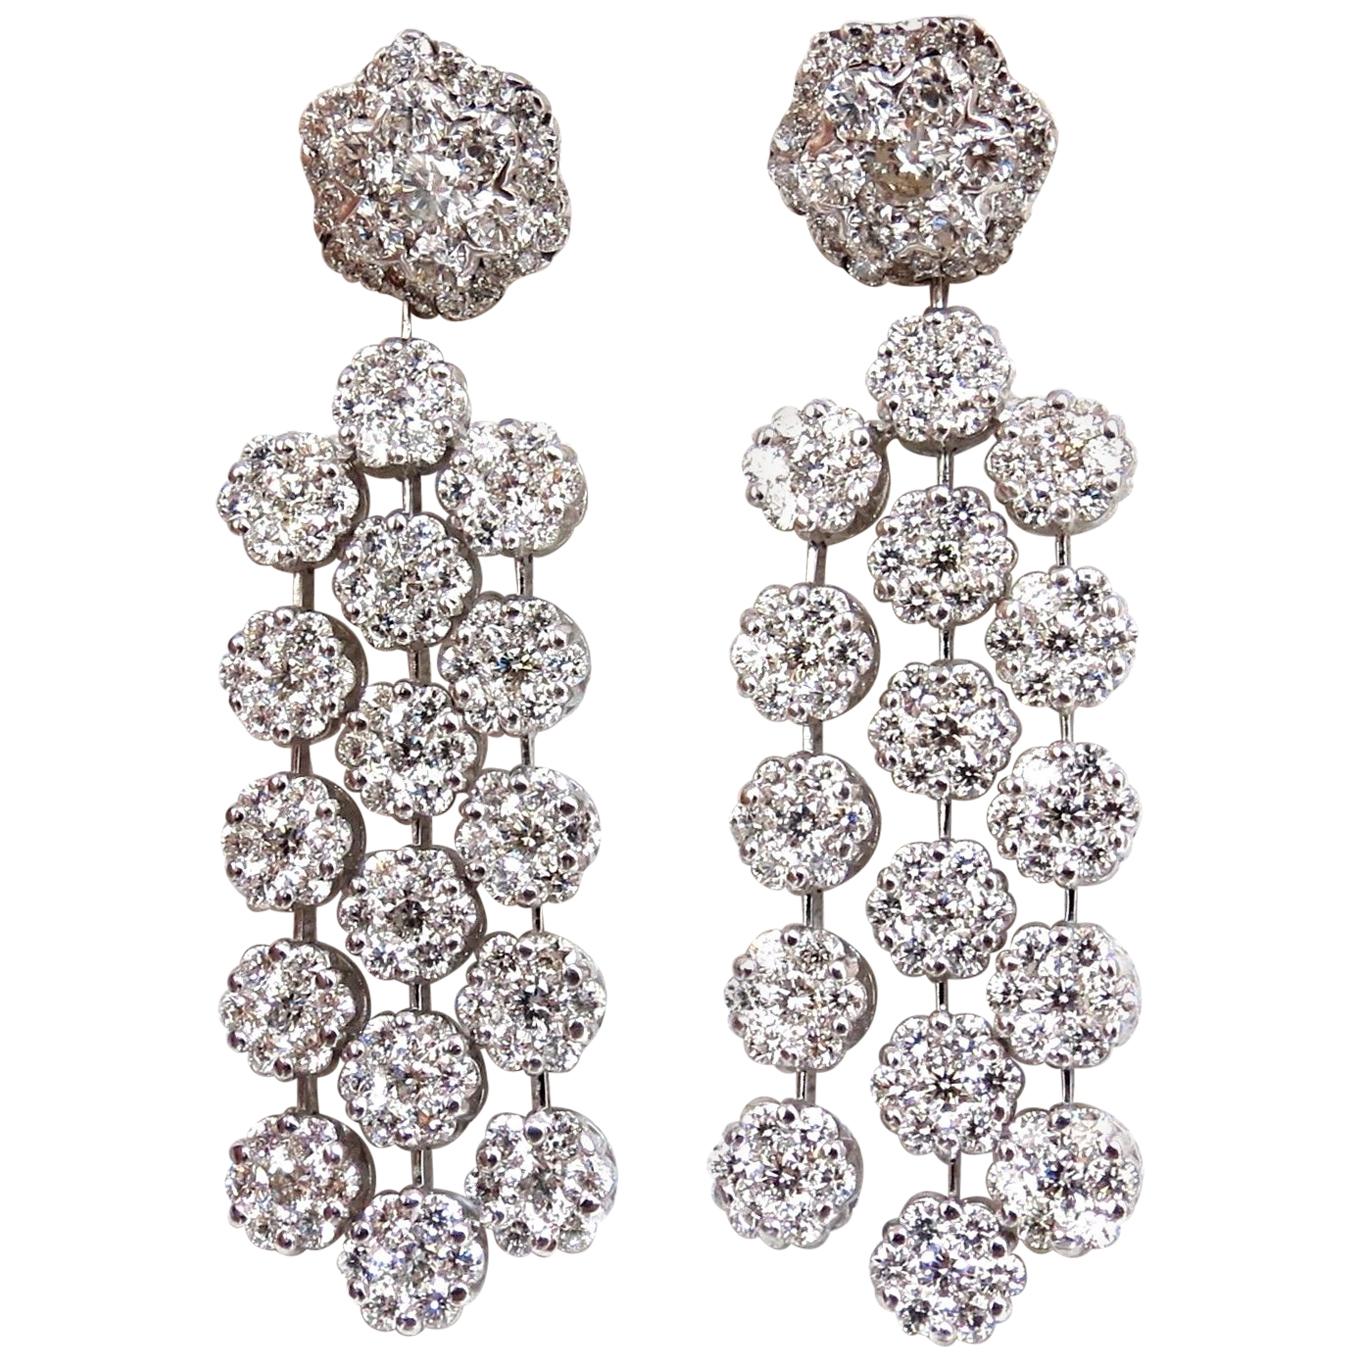 6.50ct. natural round diamonds tier floating clusters dangle earrings g.vs 18kt For Sale